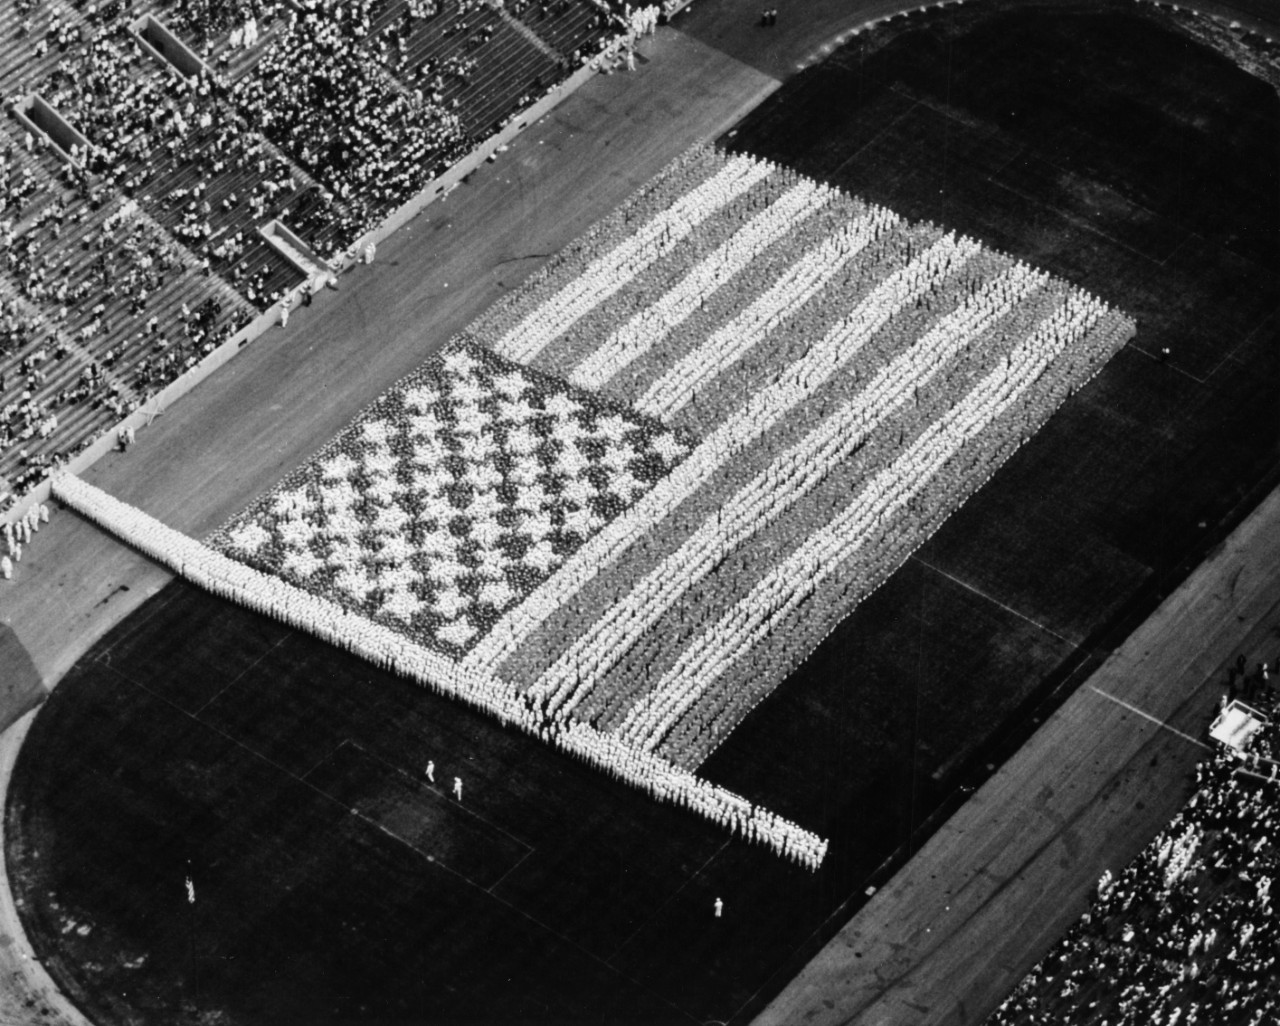 10,000 sailors from the Great Lakes Naval Training Center form a living flag at Soldier Field, Chicago.